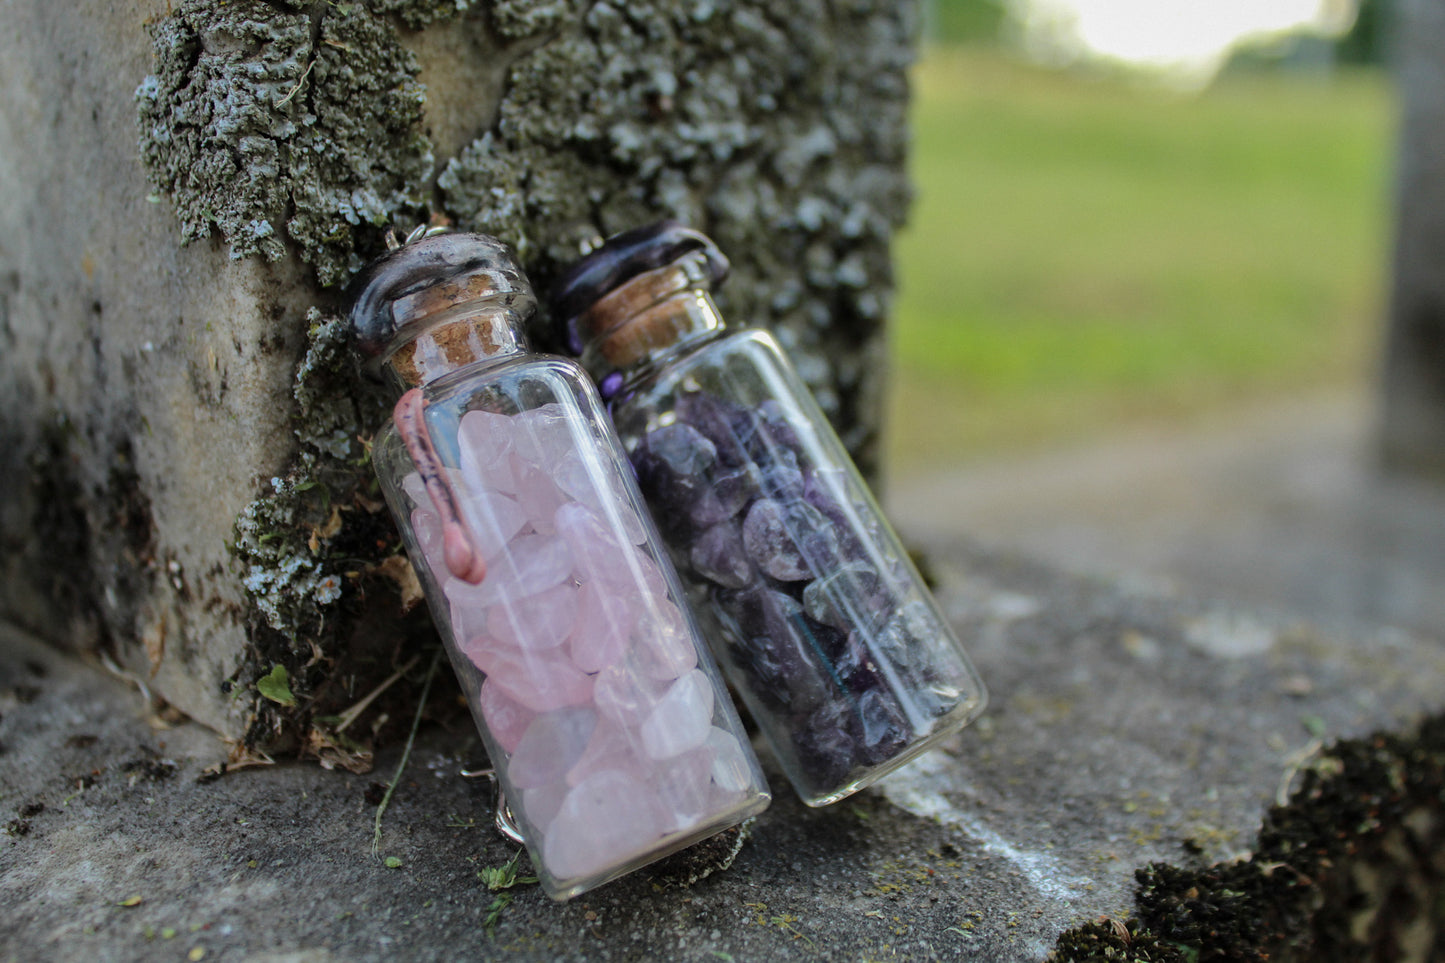 rose quartz, and amethyst crystals inside clear glass jar with wax seals and keychain attachments in front of an old tombstone